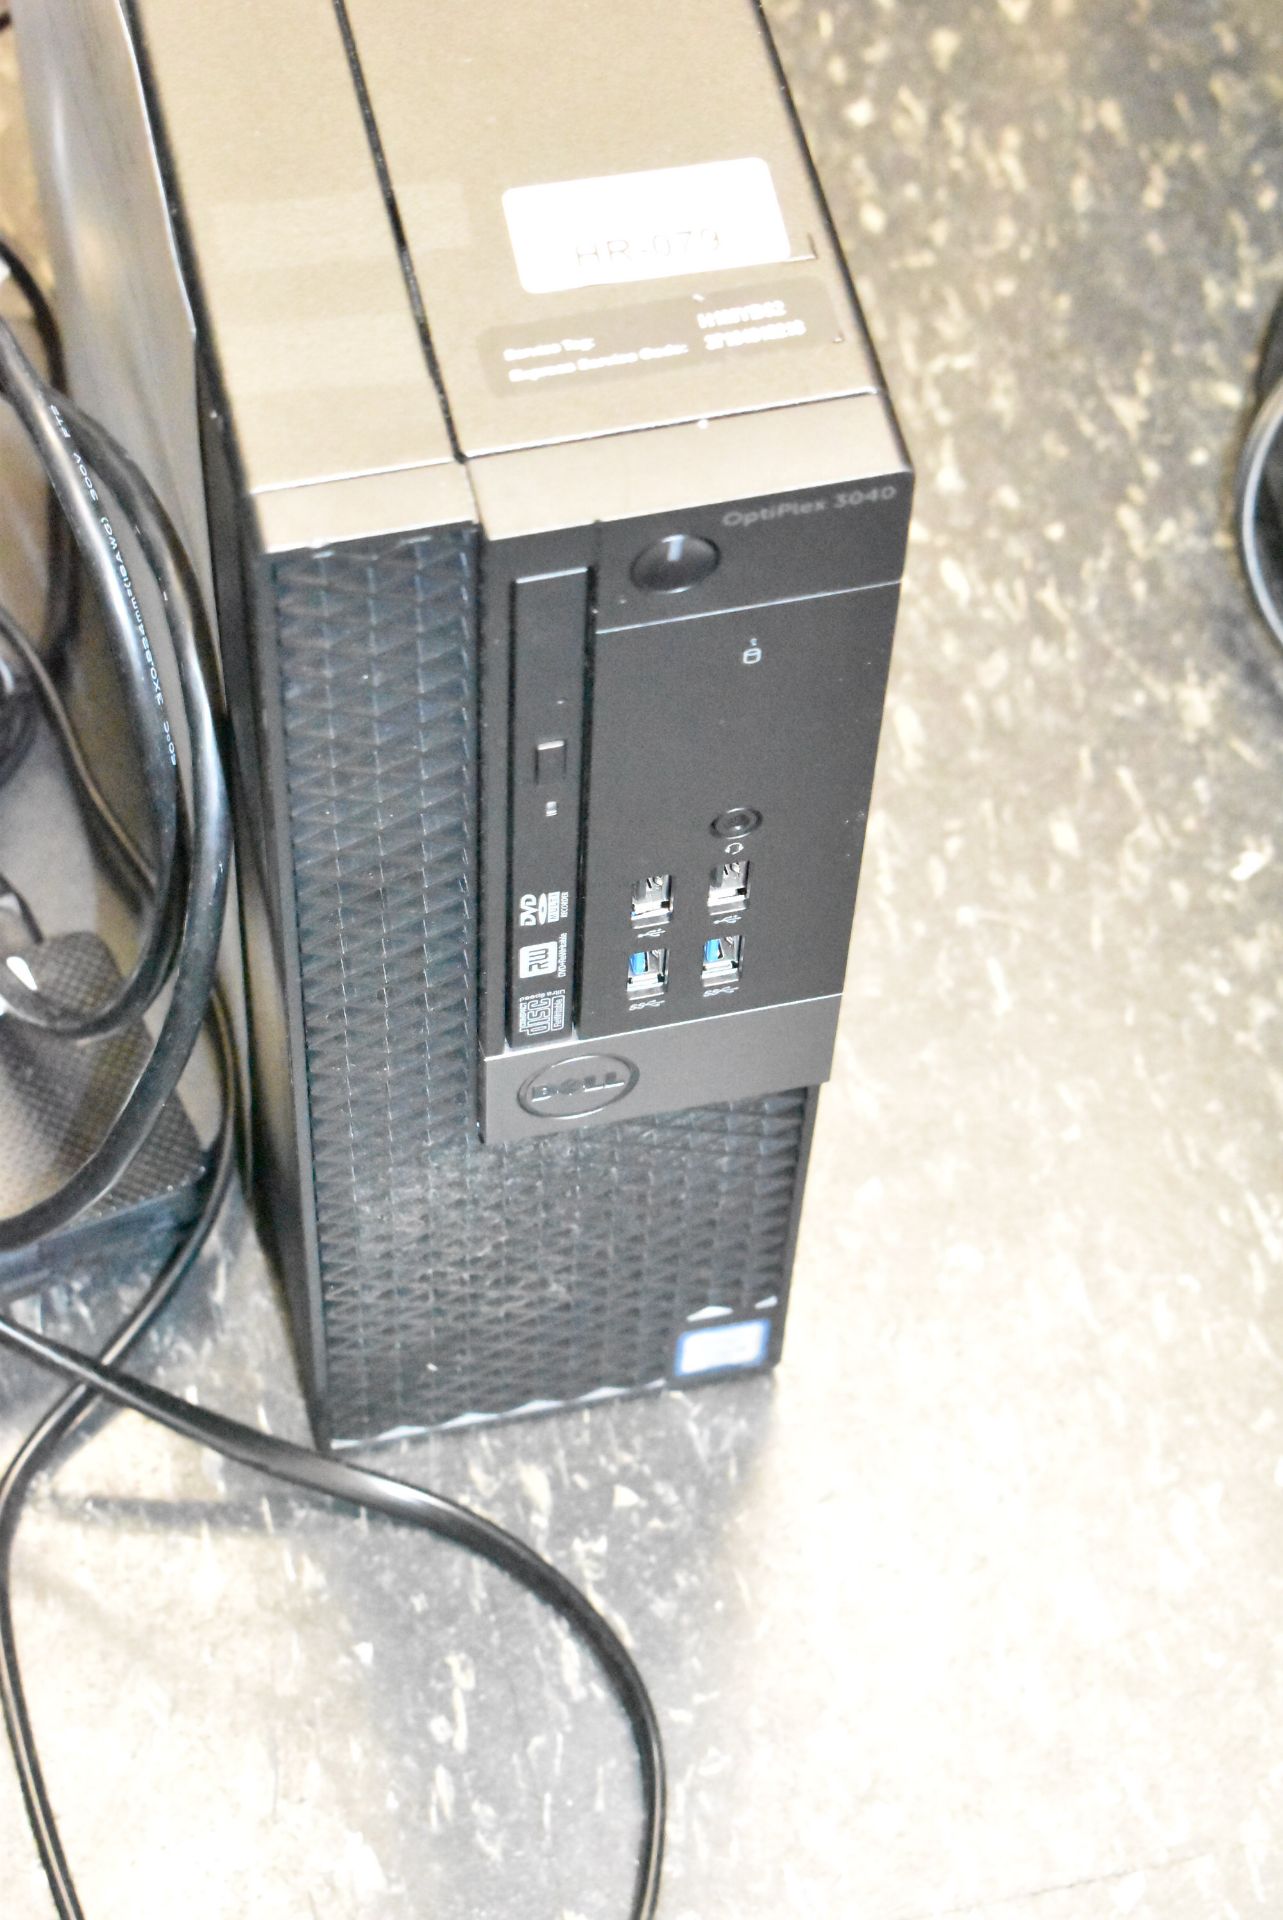 LOT/ DELL OPTIPLEX 3040 COMPUTER WITH MONITOR - Image 2 of 2